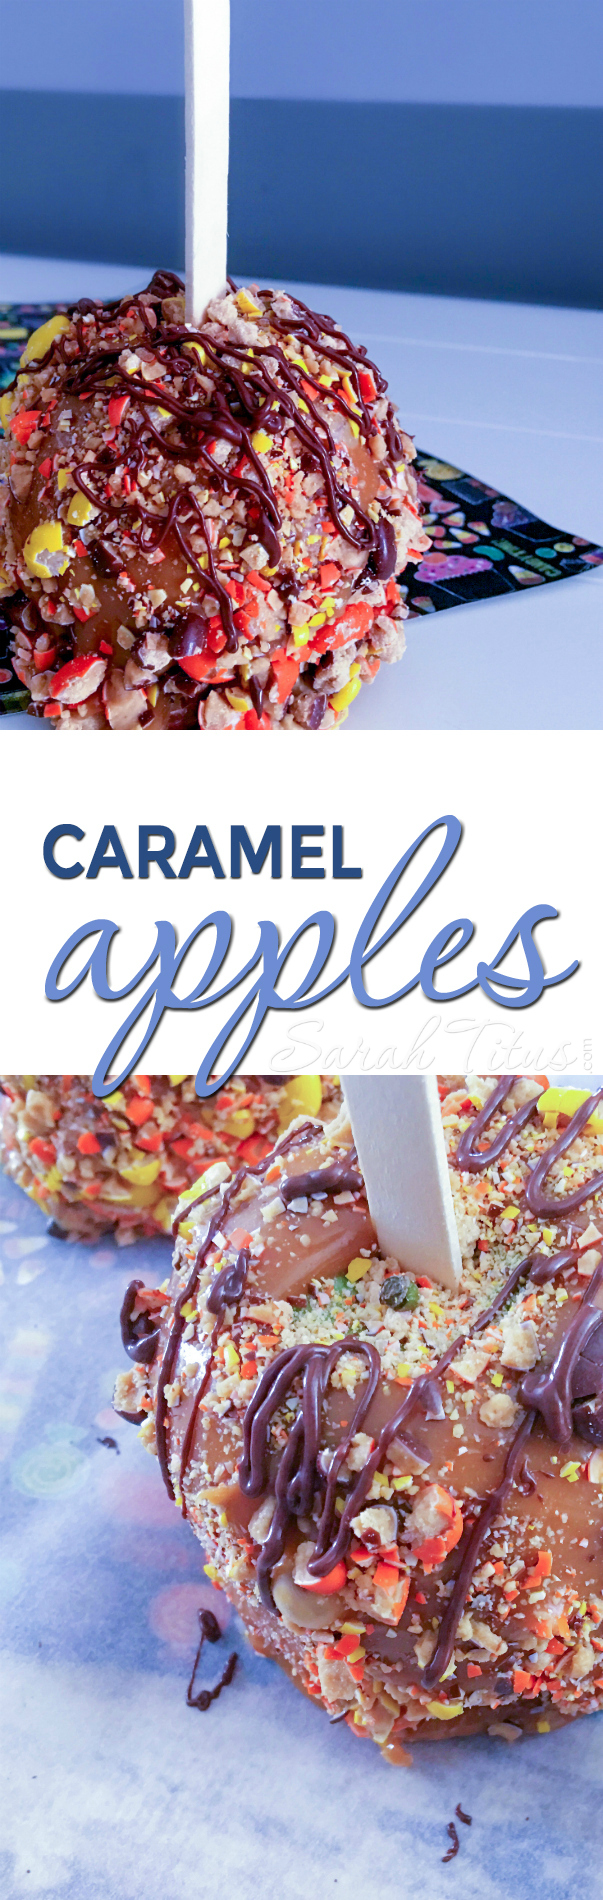 If "An apple a day keeps the doctor away," make mine one of these absolutely delicious gourmet caramel apples please!!! Here's how to make them!